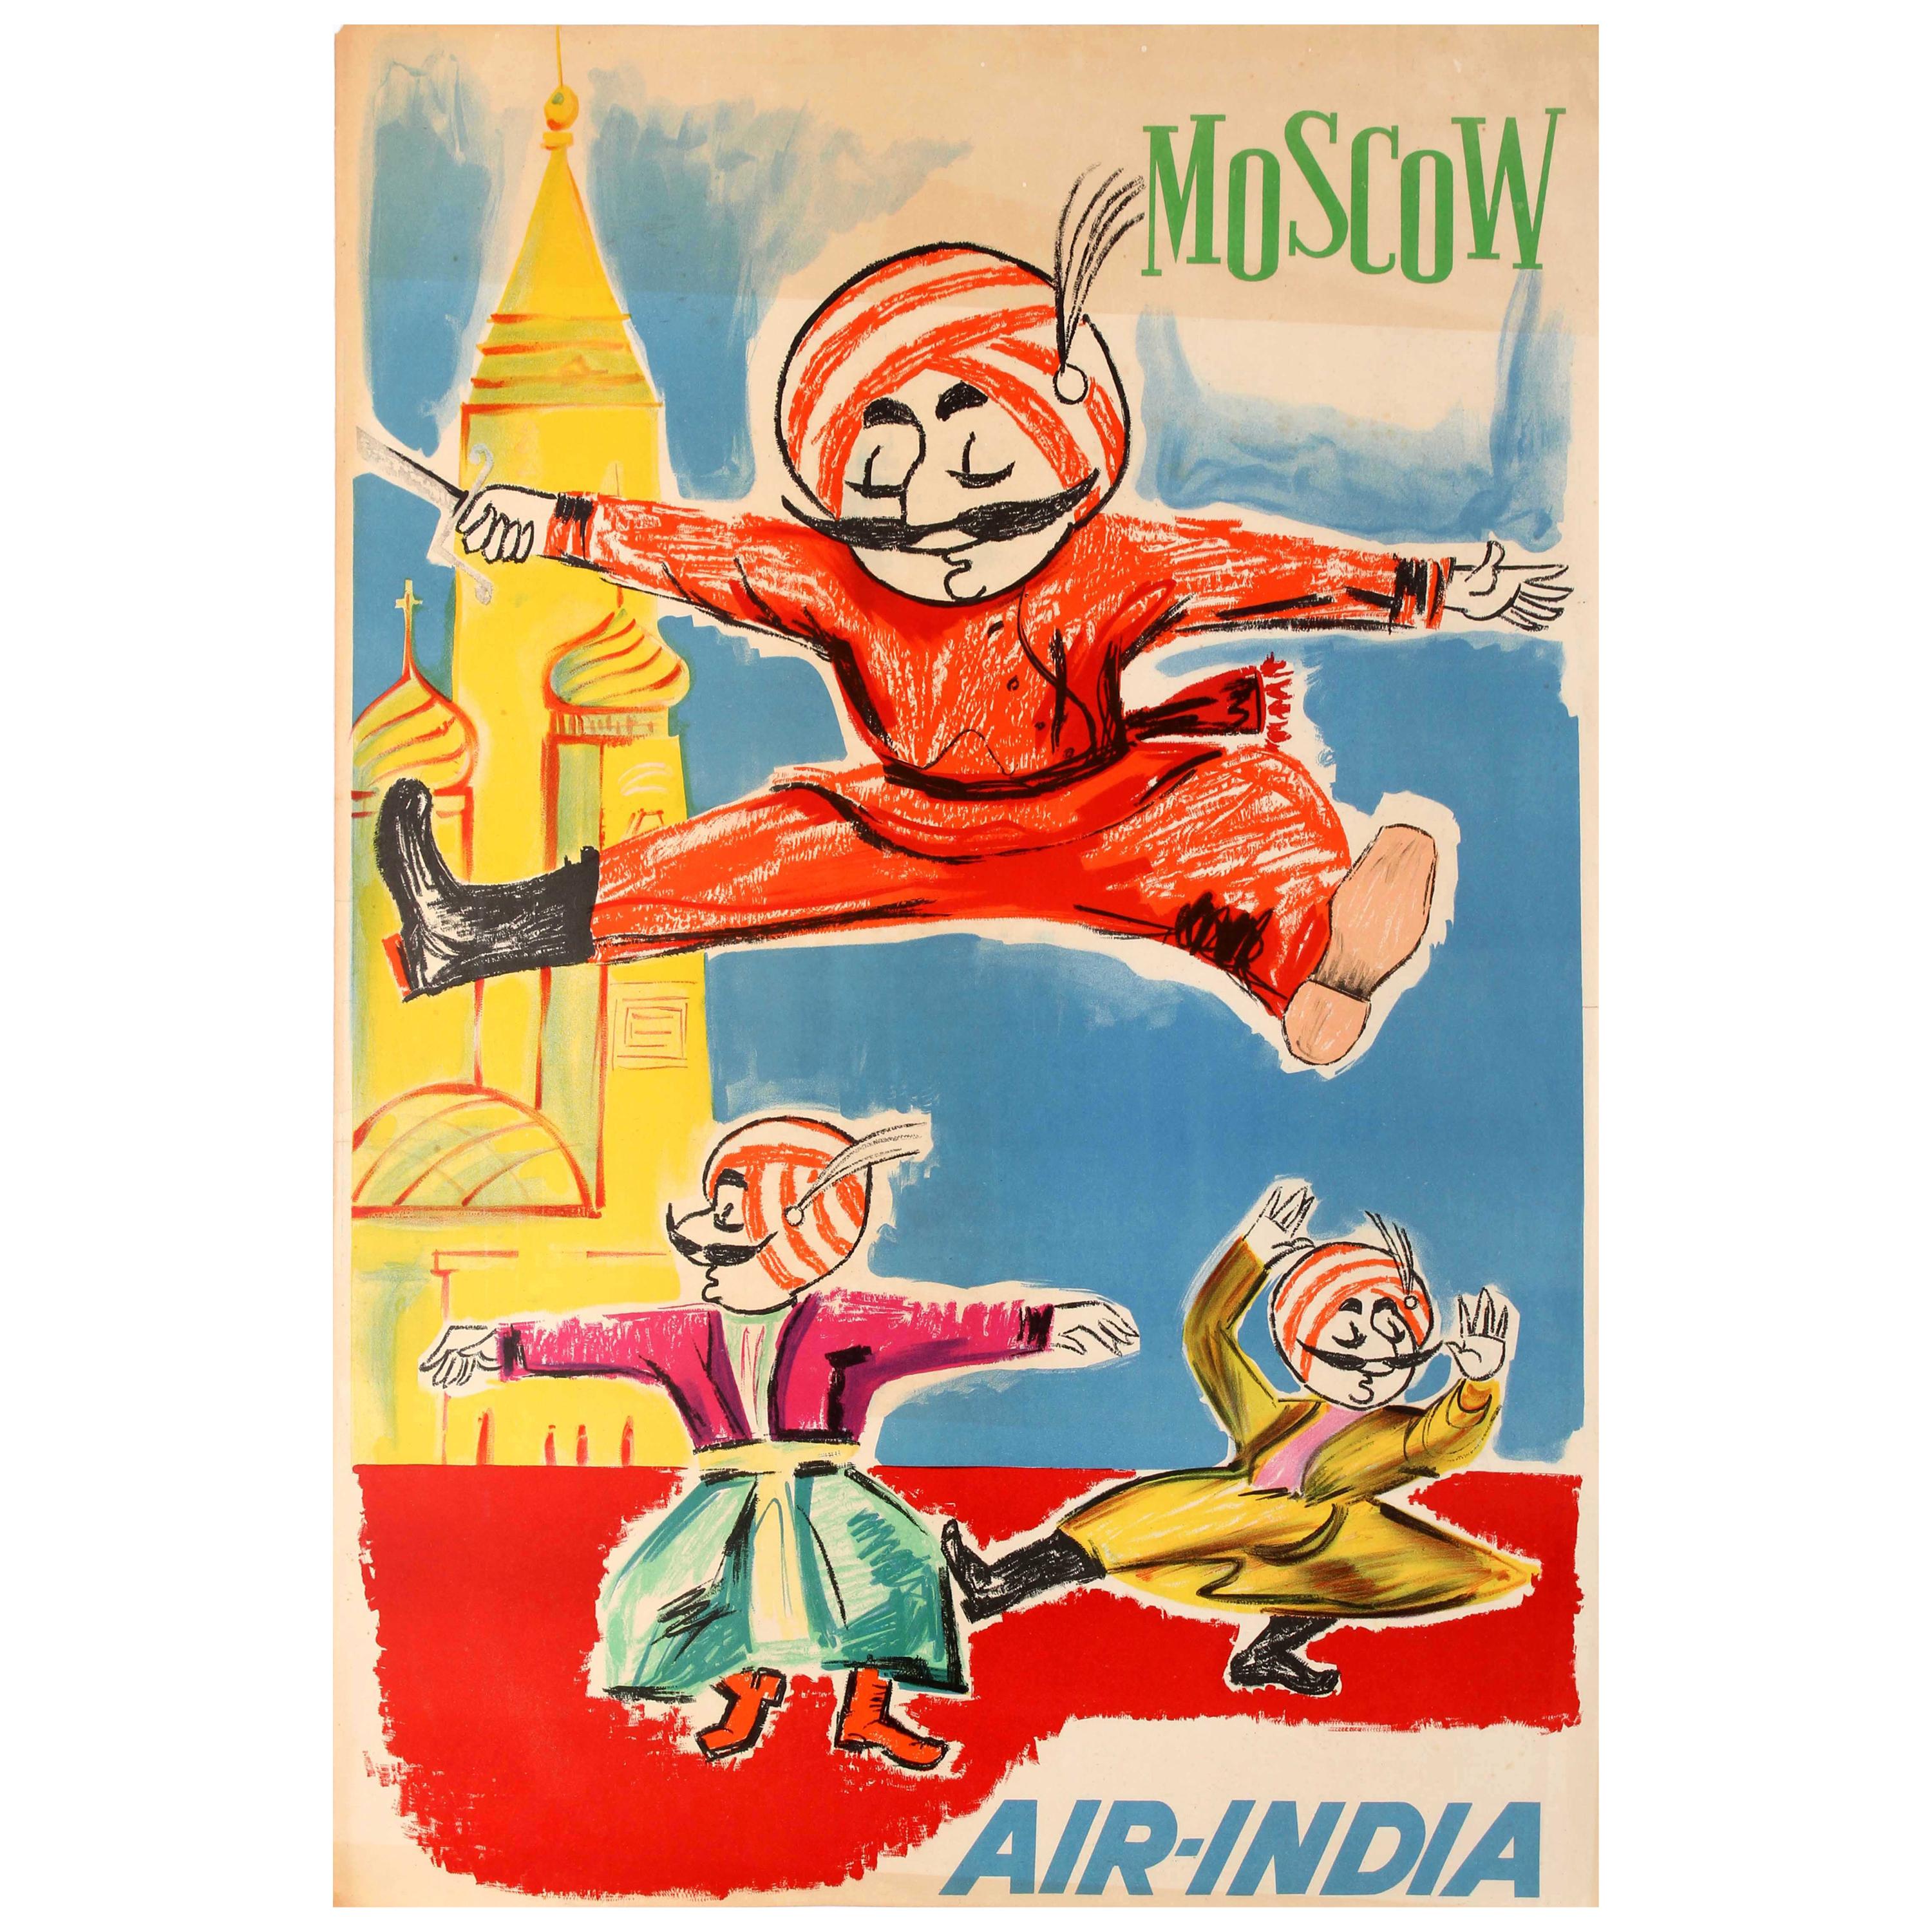 Original Vintage Moscow Air India Poster Maharajah Cossack Dancing on Red Square